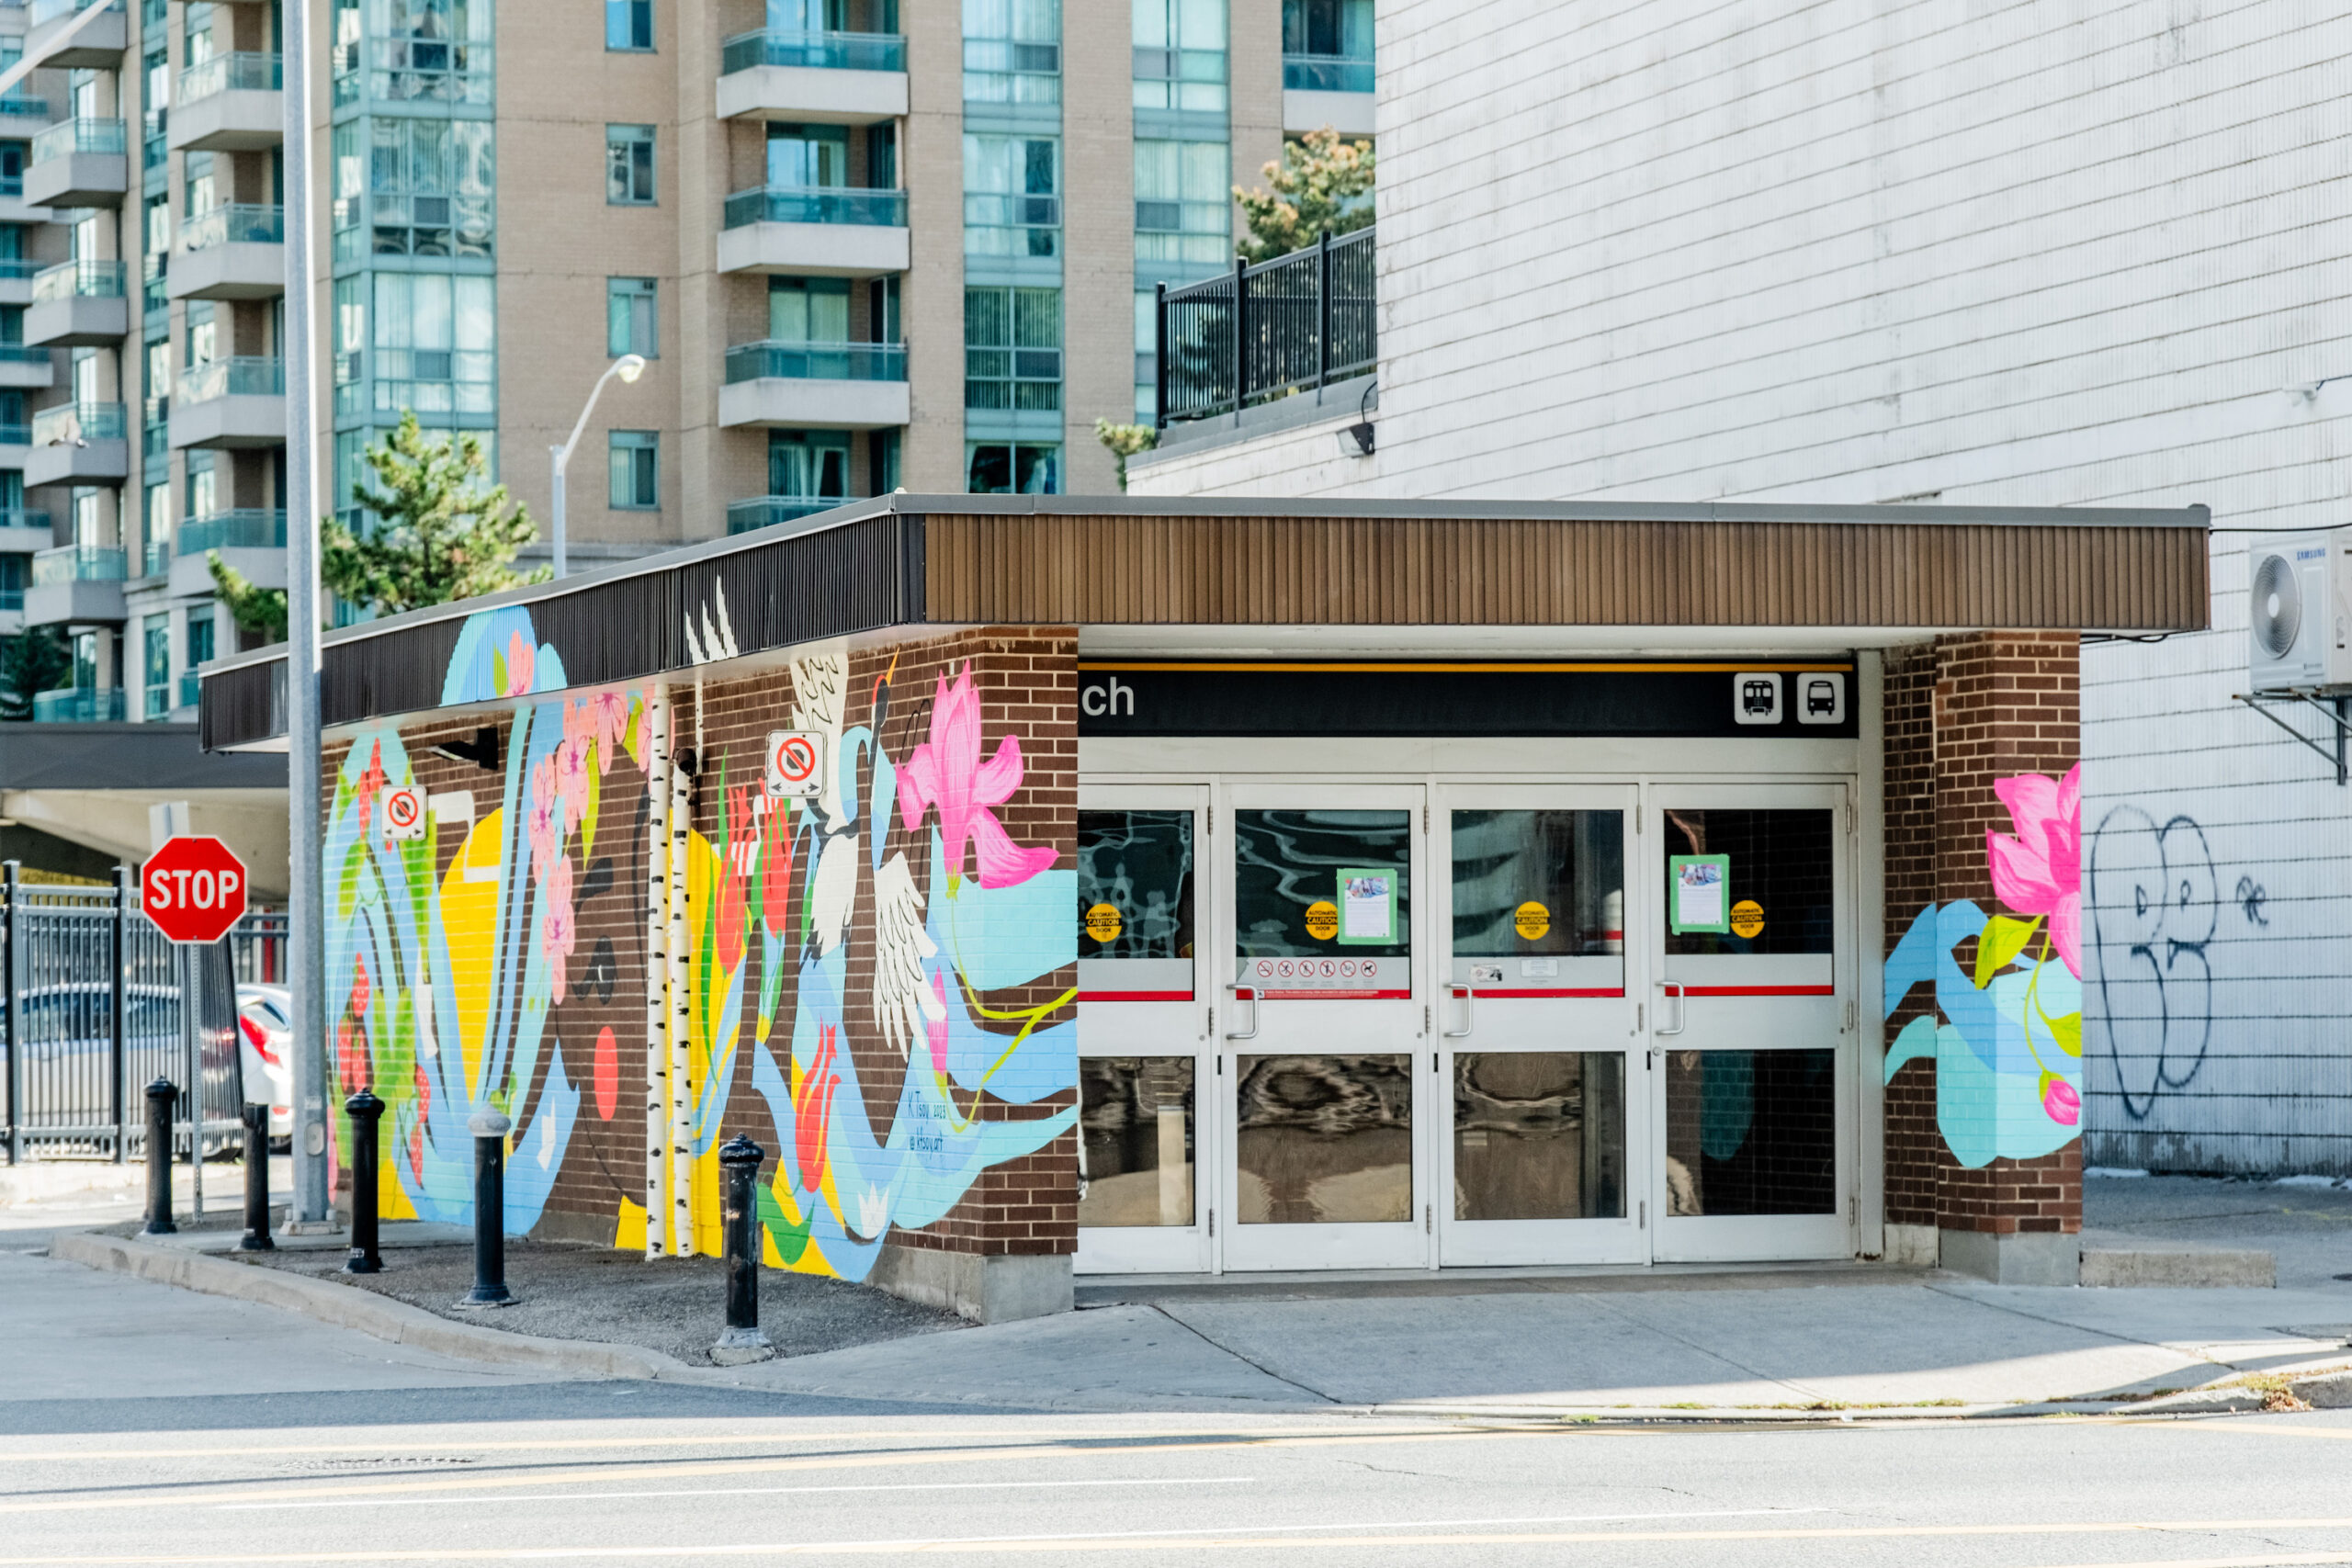 The entrance to Toronto's Finch subway station with the Crossroads mural by Kseniya Tsoy